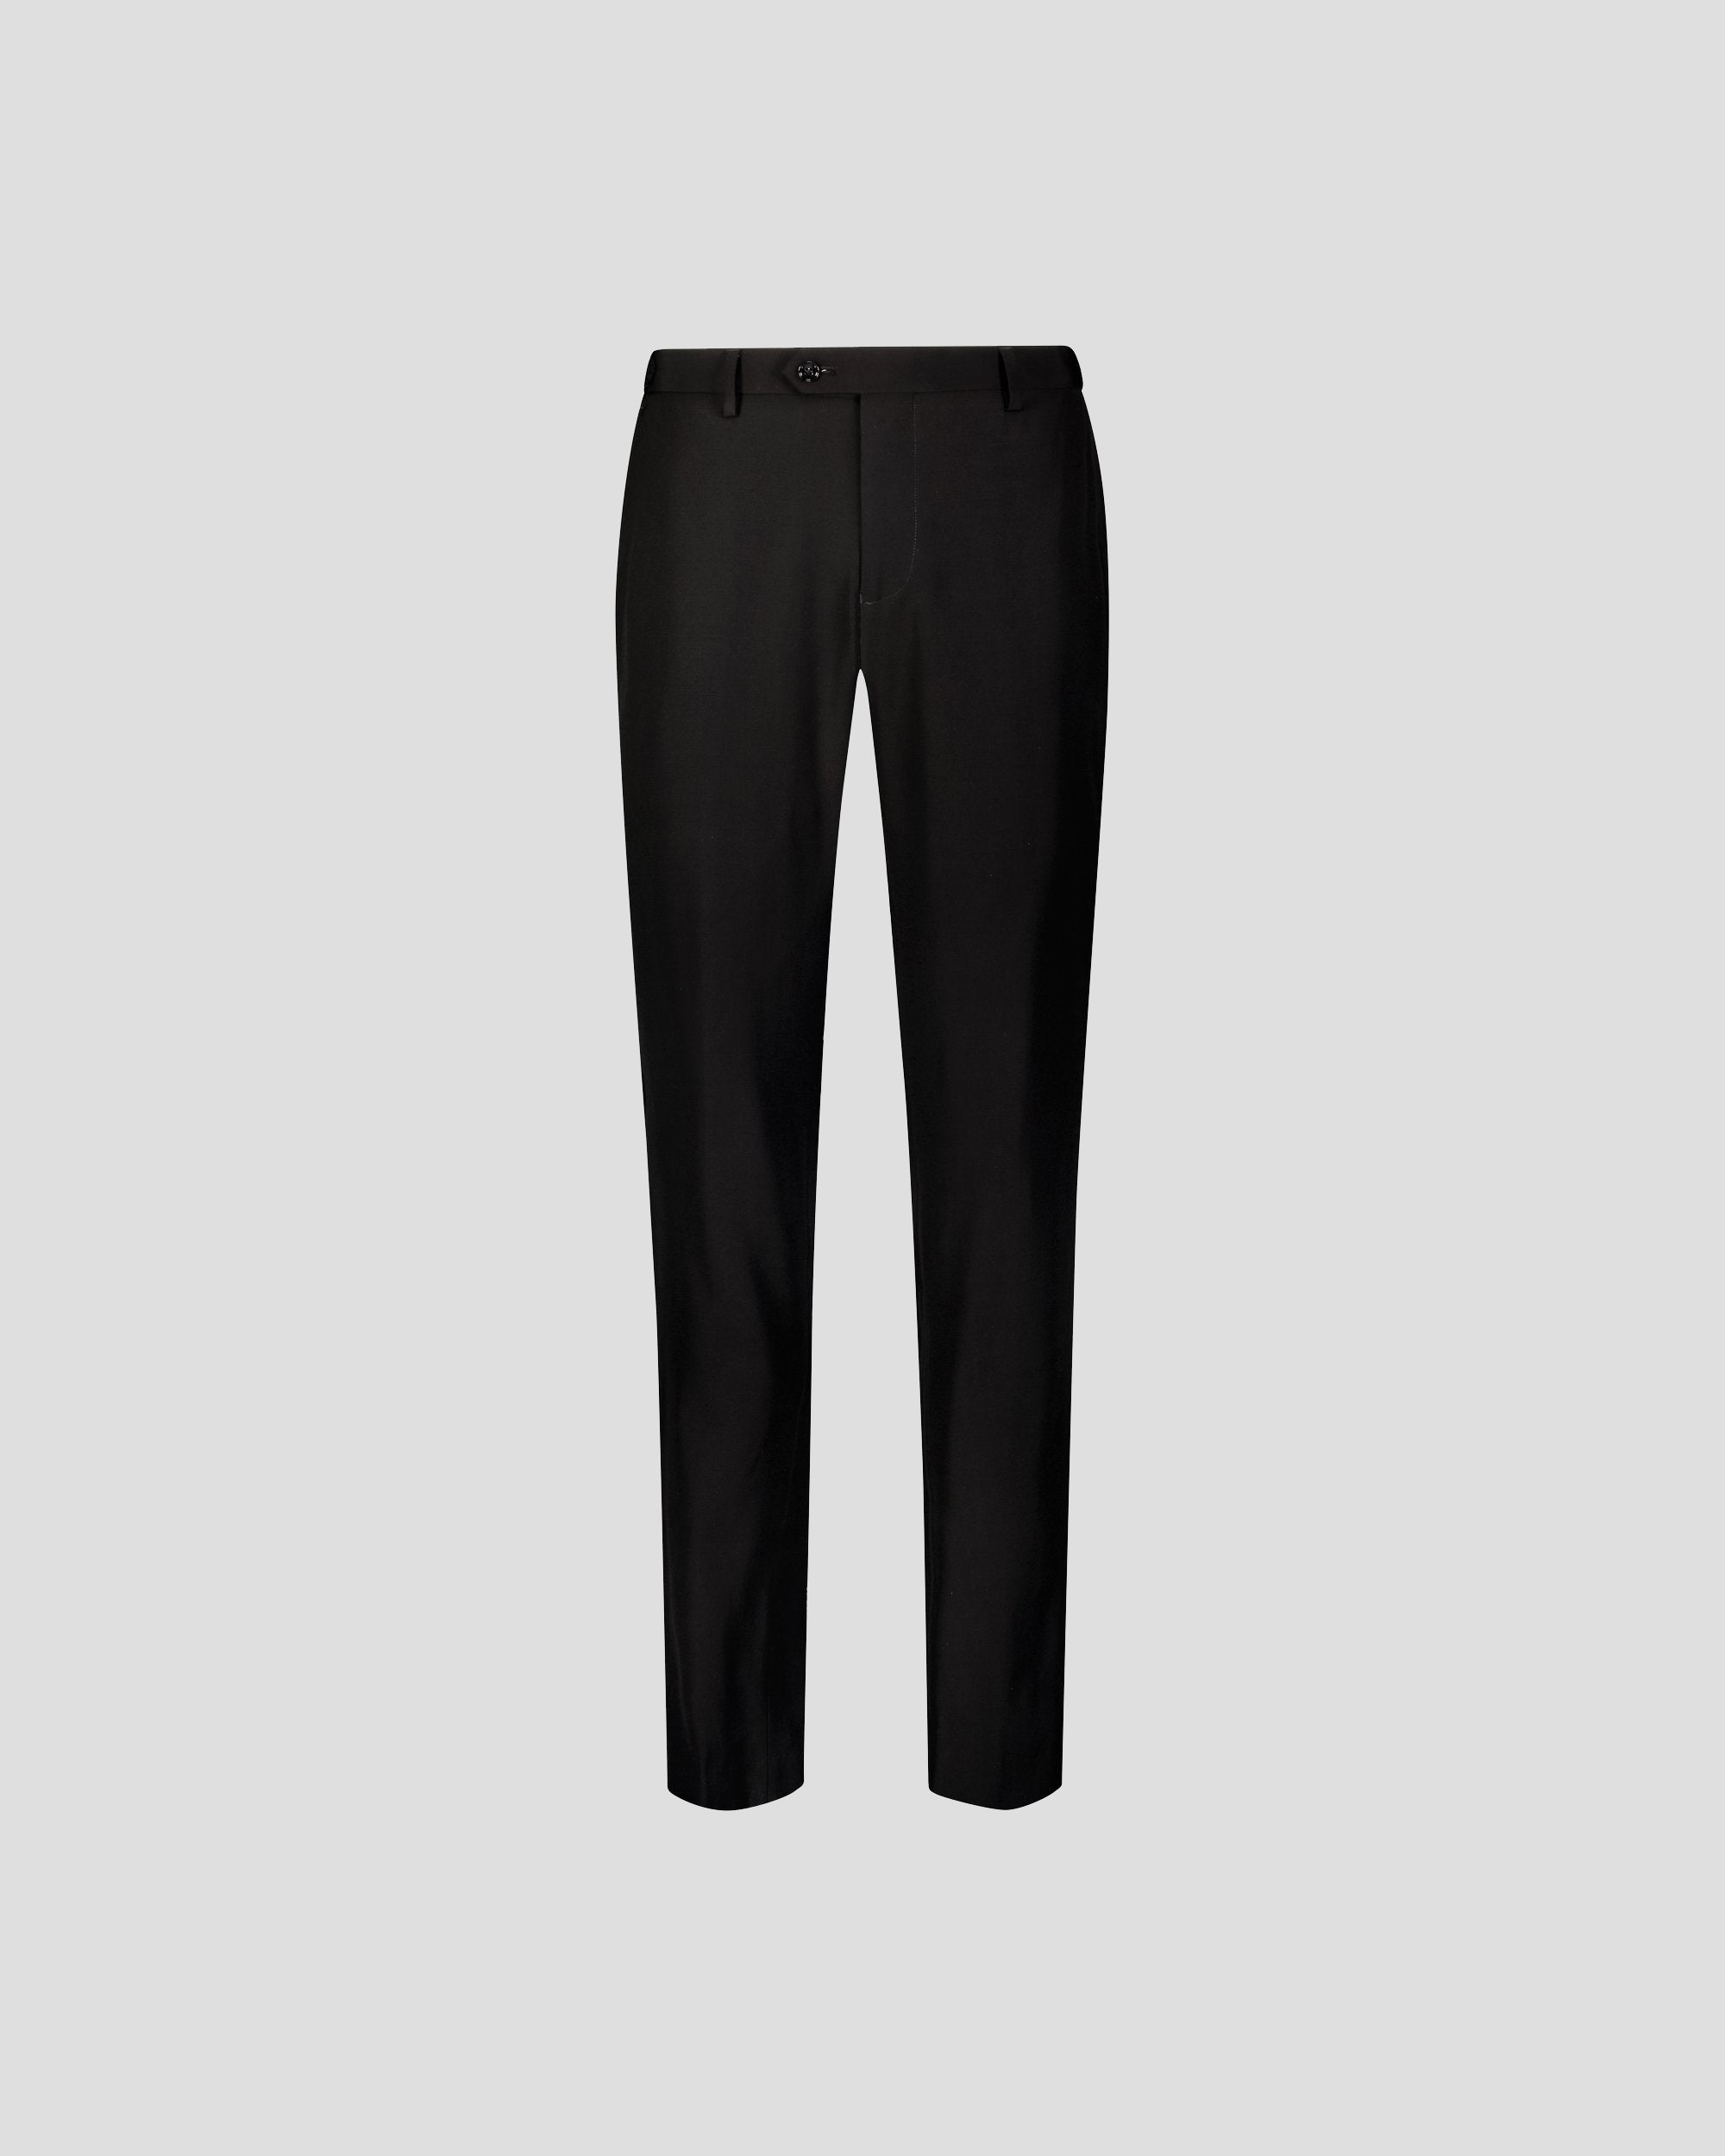 Buy Black Trousers & Pants for Men by Force Online | Ajio.com